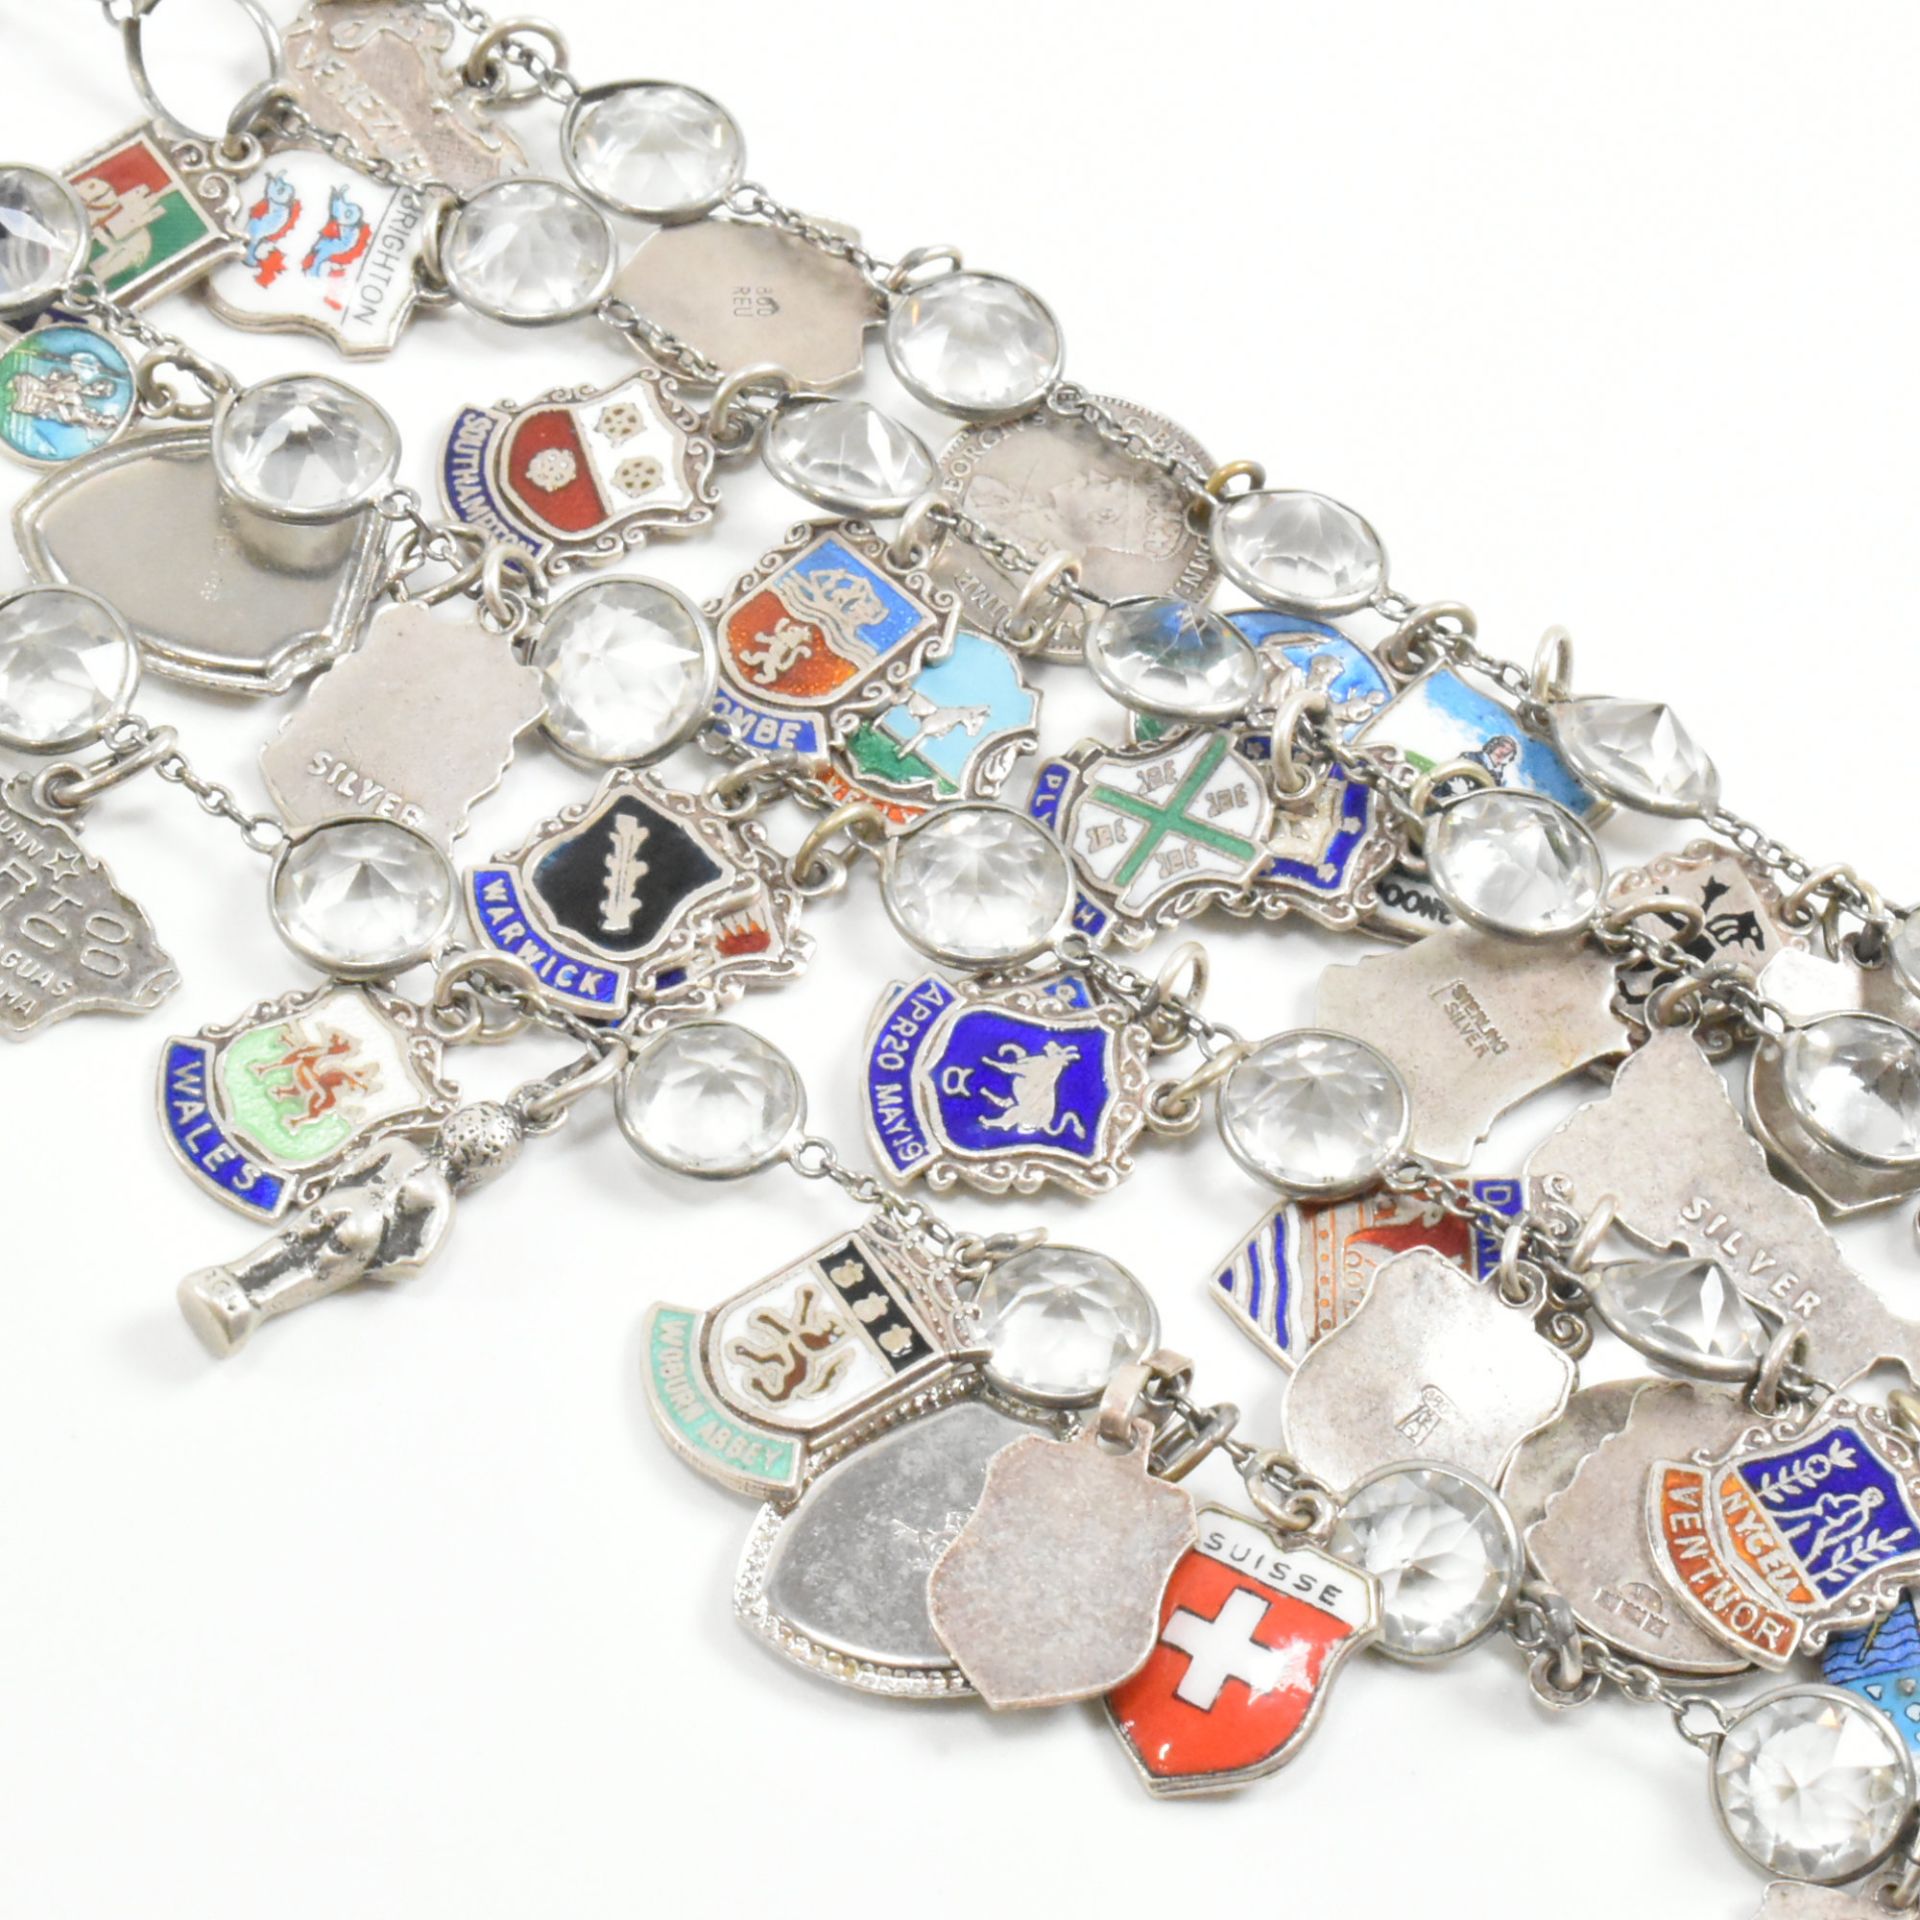 VINTAGE SILVER & WHITE METAL TOWN COUNTRY CHARM BRACELET - Image 4 of 13